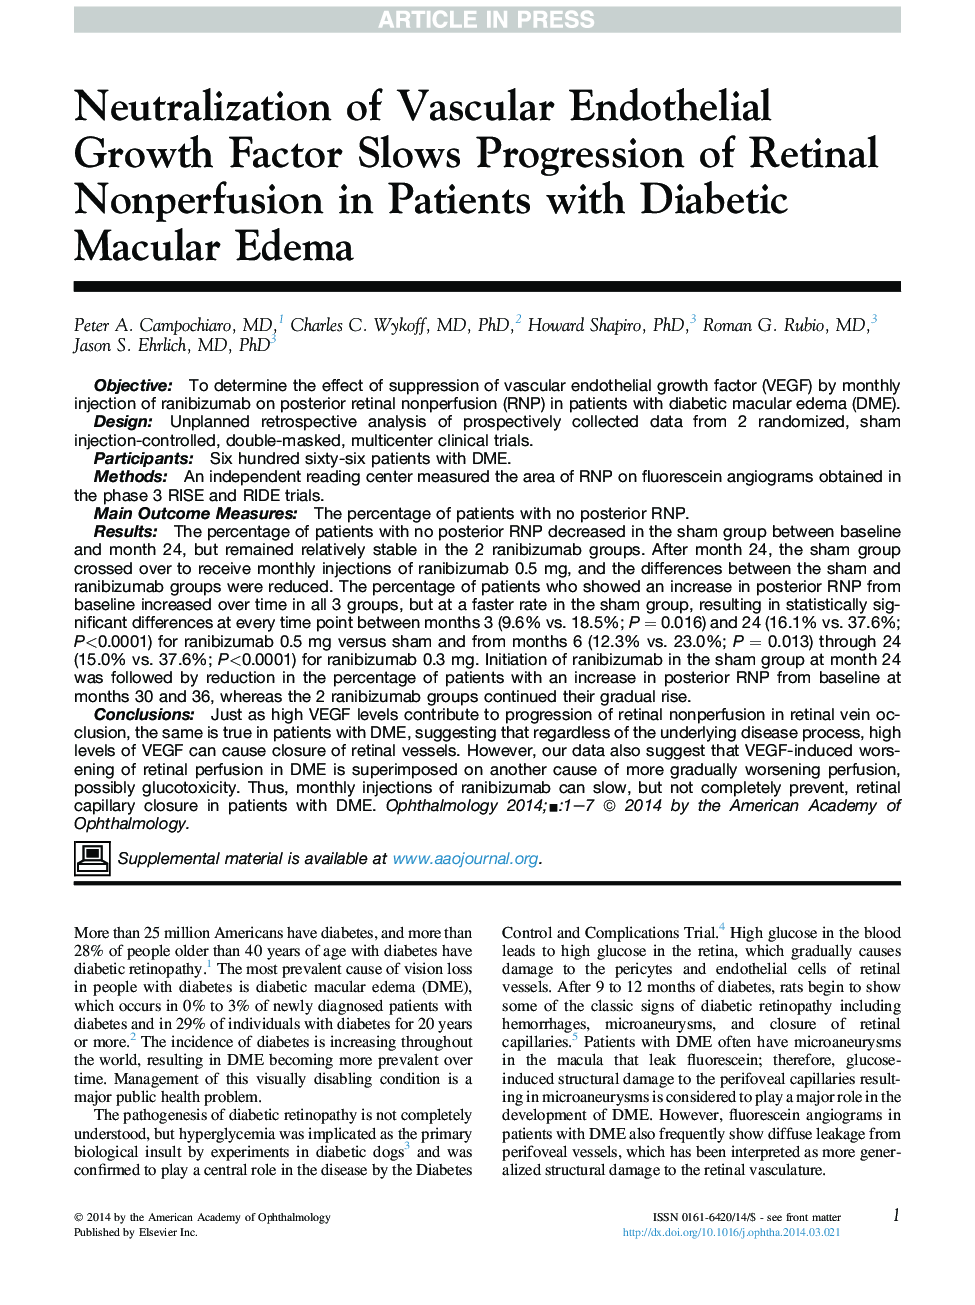 Neutralization of Vascular Endothelial Growth Factor Slows Progression of Retinal Nonperfusion in Patients with Diabetic Macular Edema